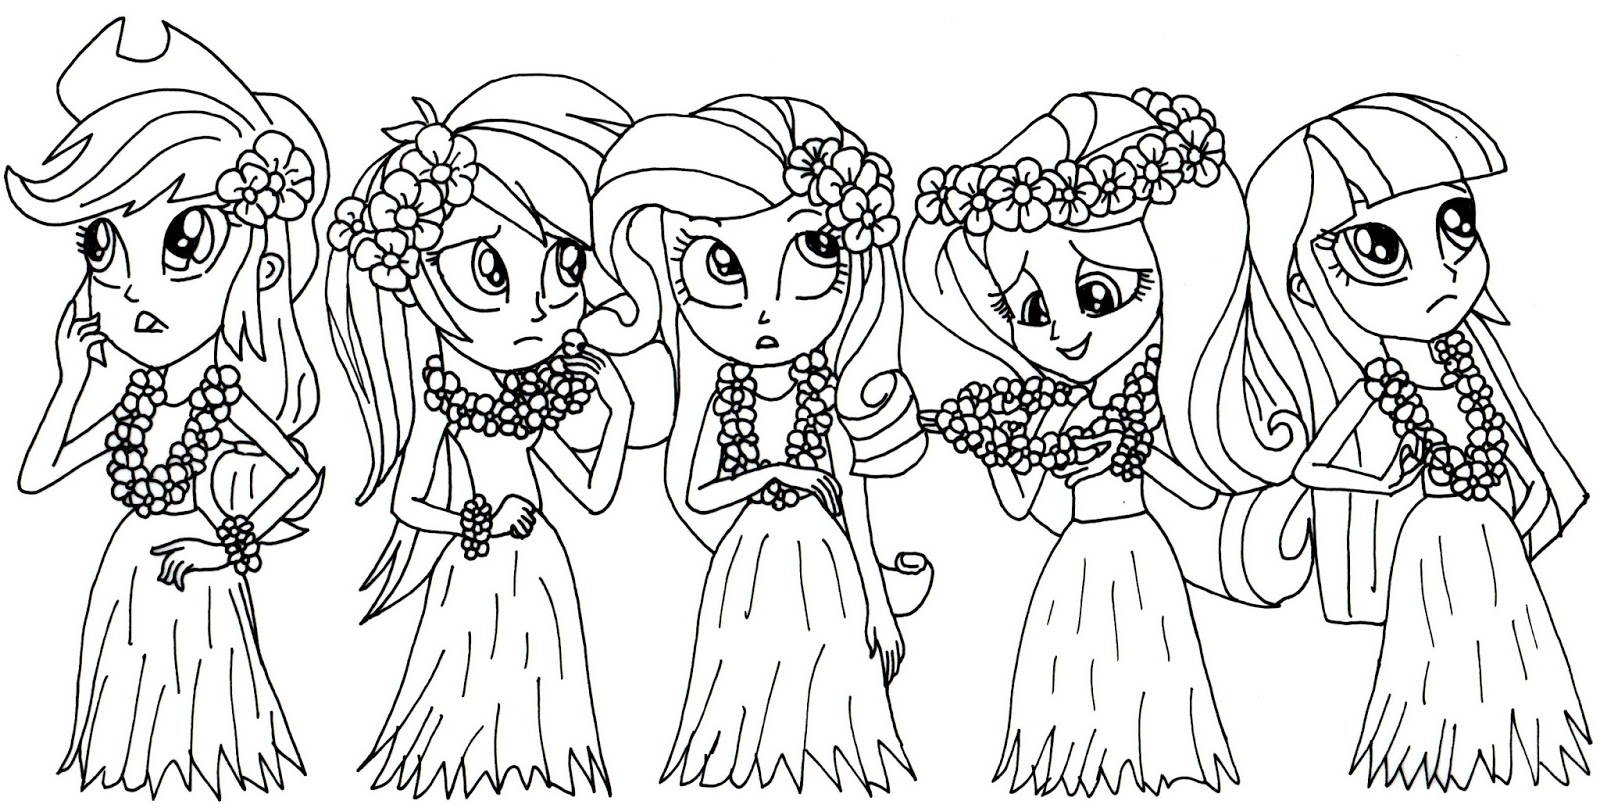 Free Printable My Little Pony Equestria Girls Coloring Page Mama Likes This